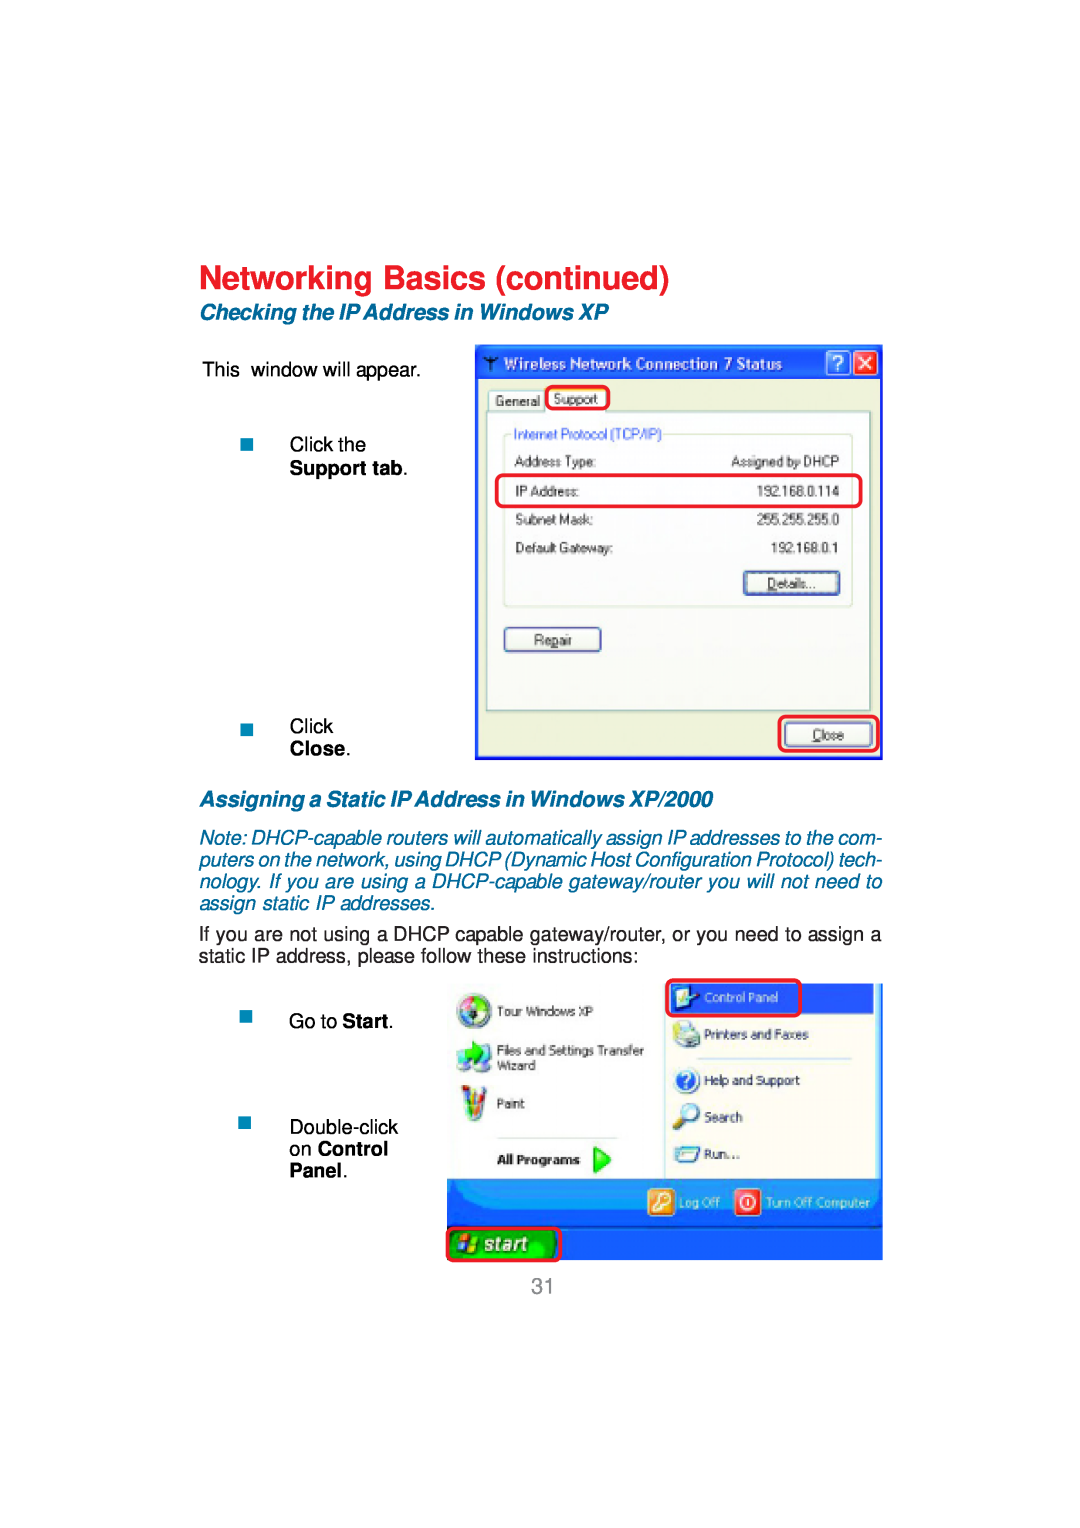 D-Link DWL-AG530 manual Assigning a Static IP Address in Windows XP/2000, Networking Basics continued 